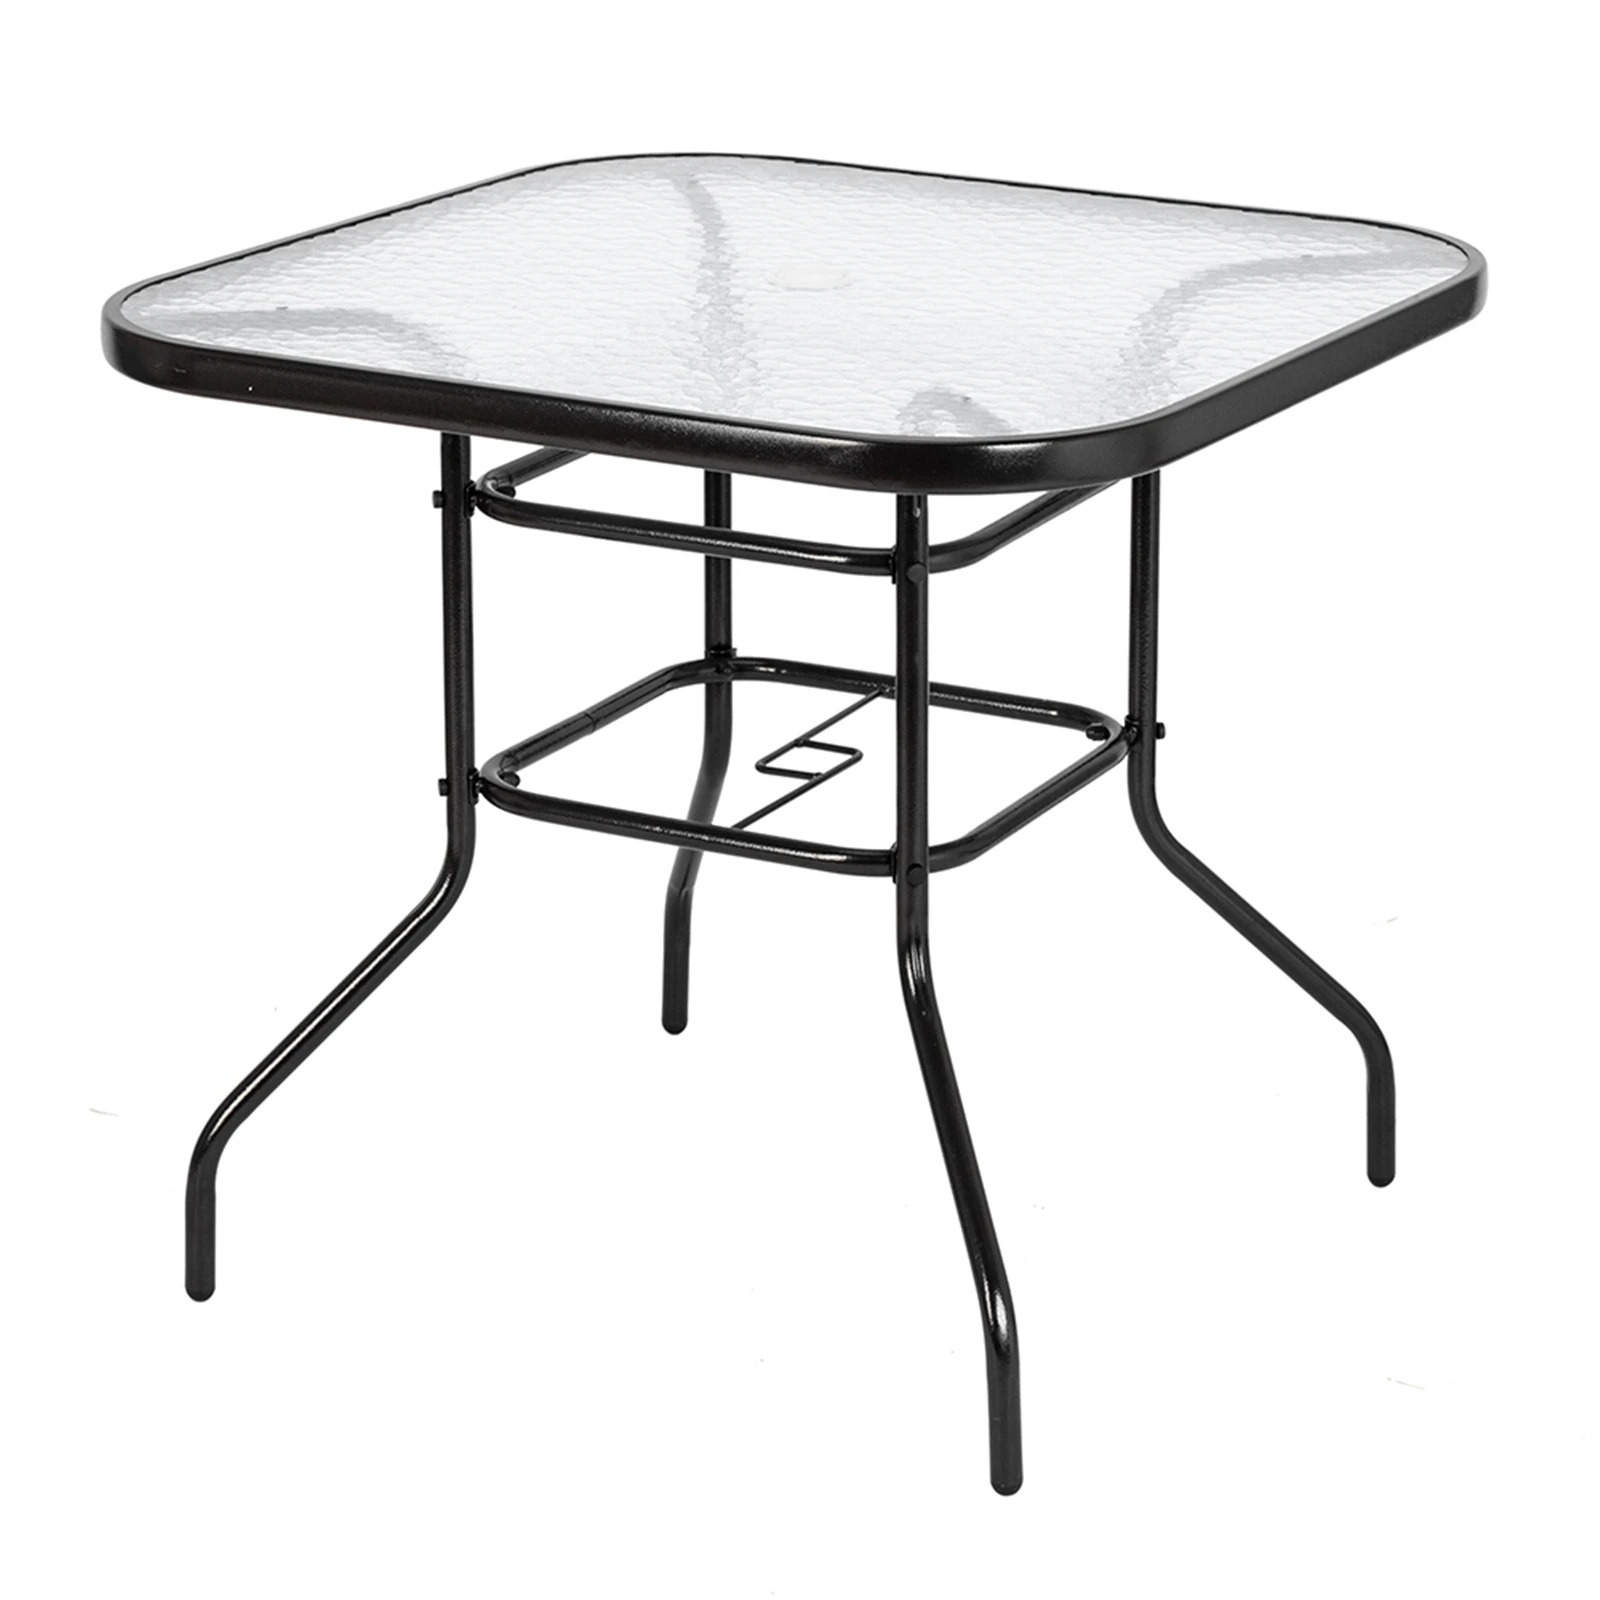 

Outdoor Dining Table Square Toughened Glass Table Yard Garden Glass Table Outdoor Furniture Set